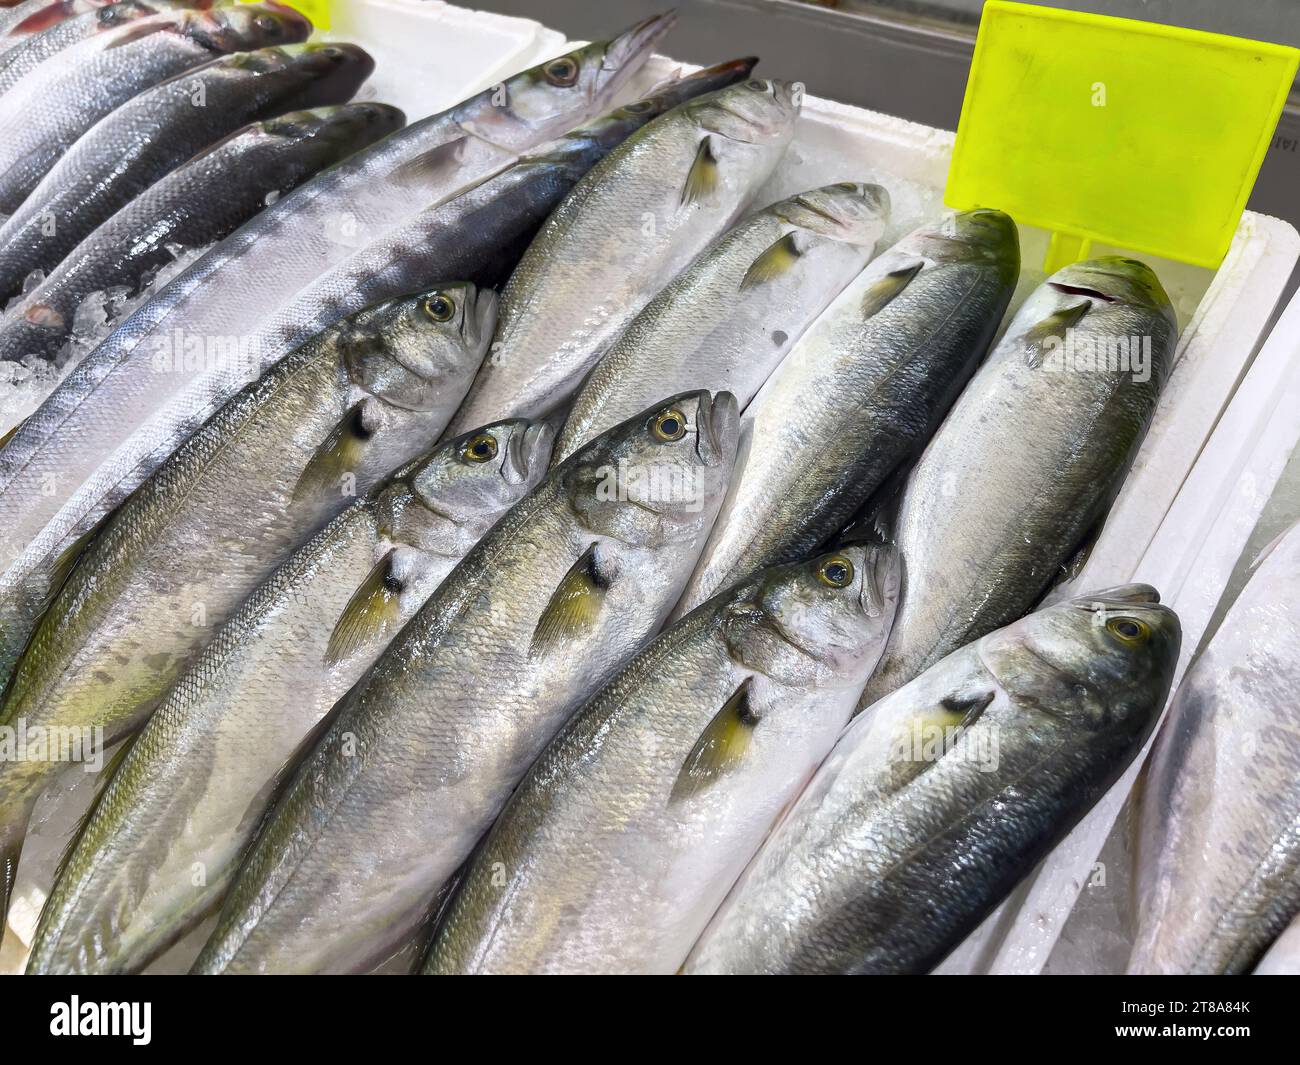 Freshly caught bluefish lined up on the counter at the fish market Stock Photo